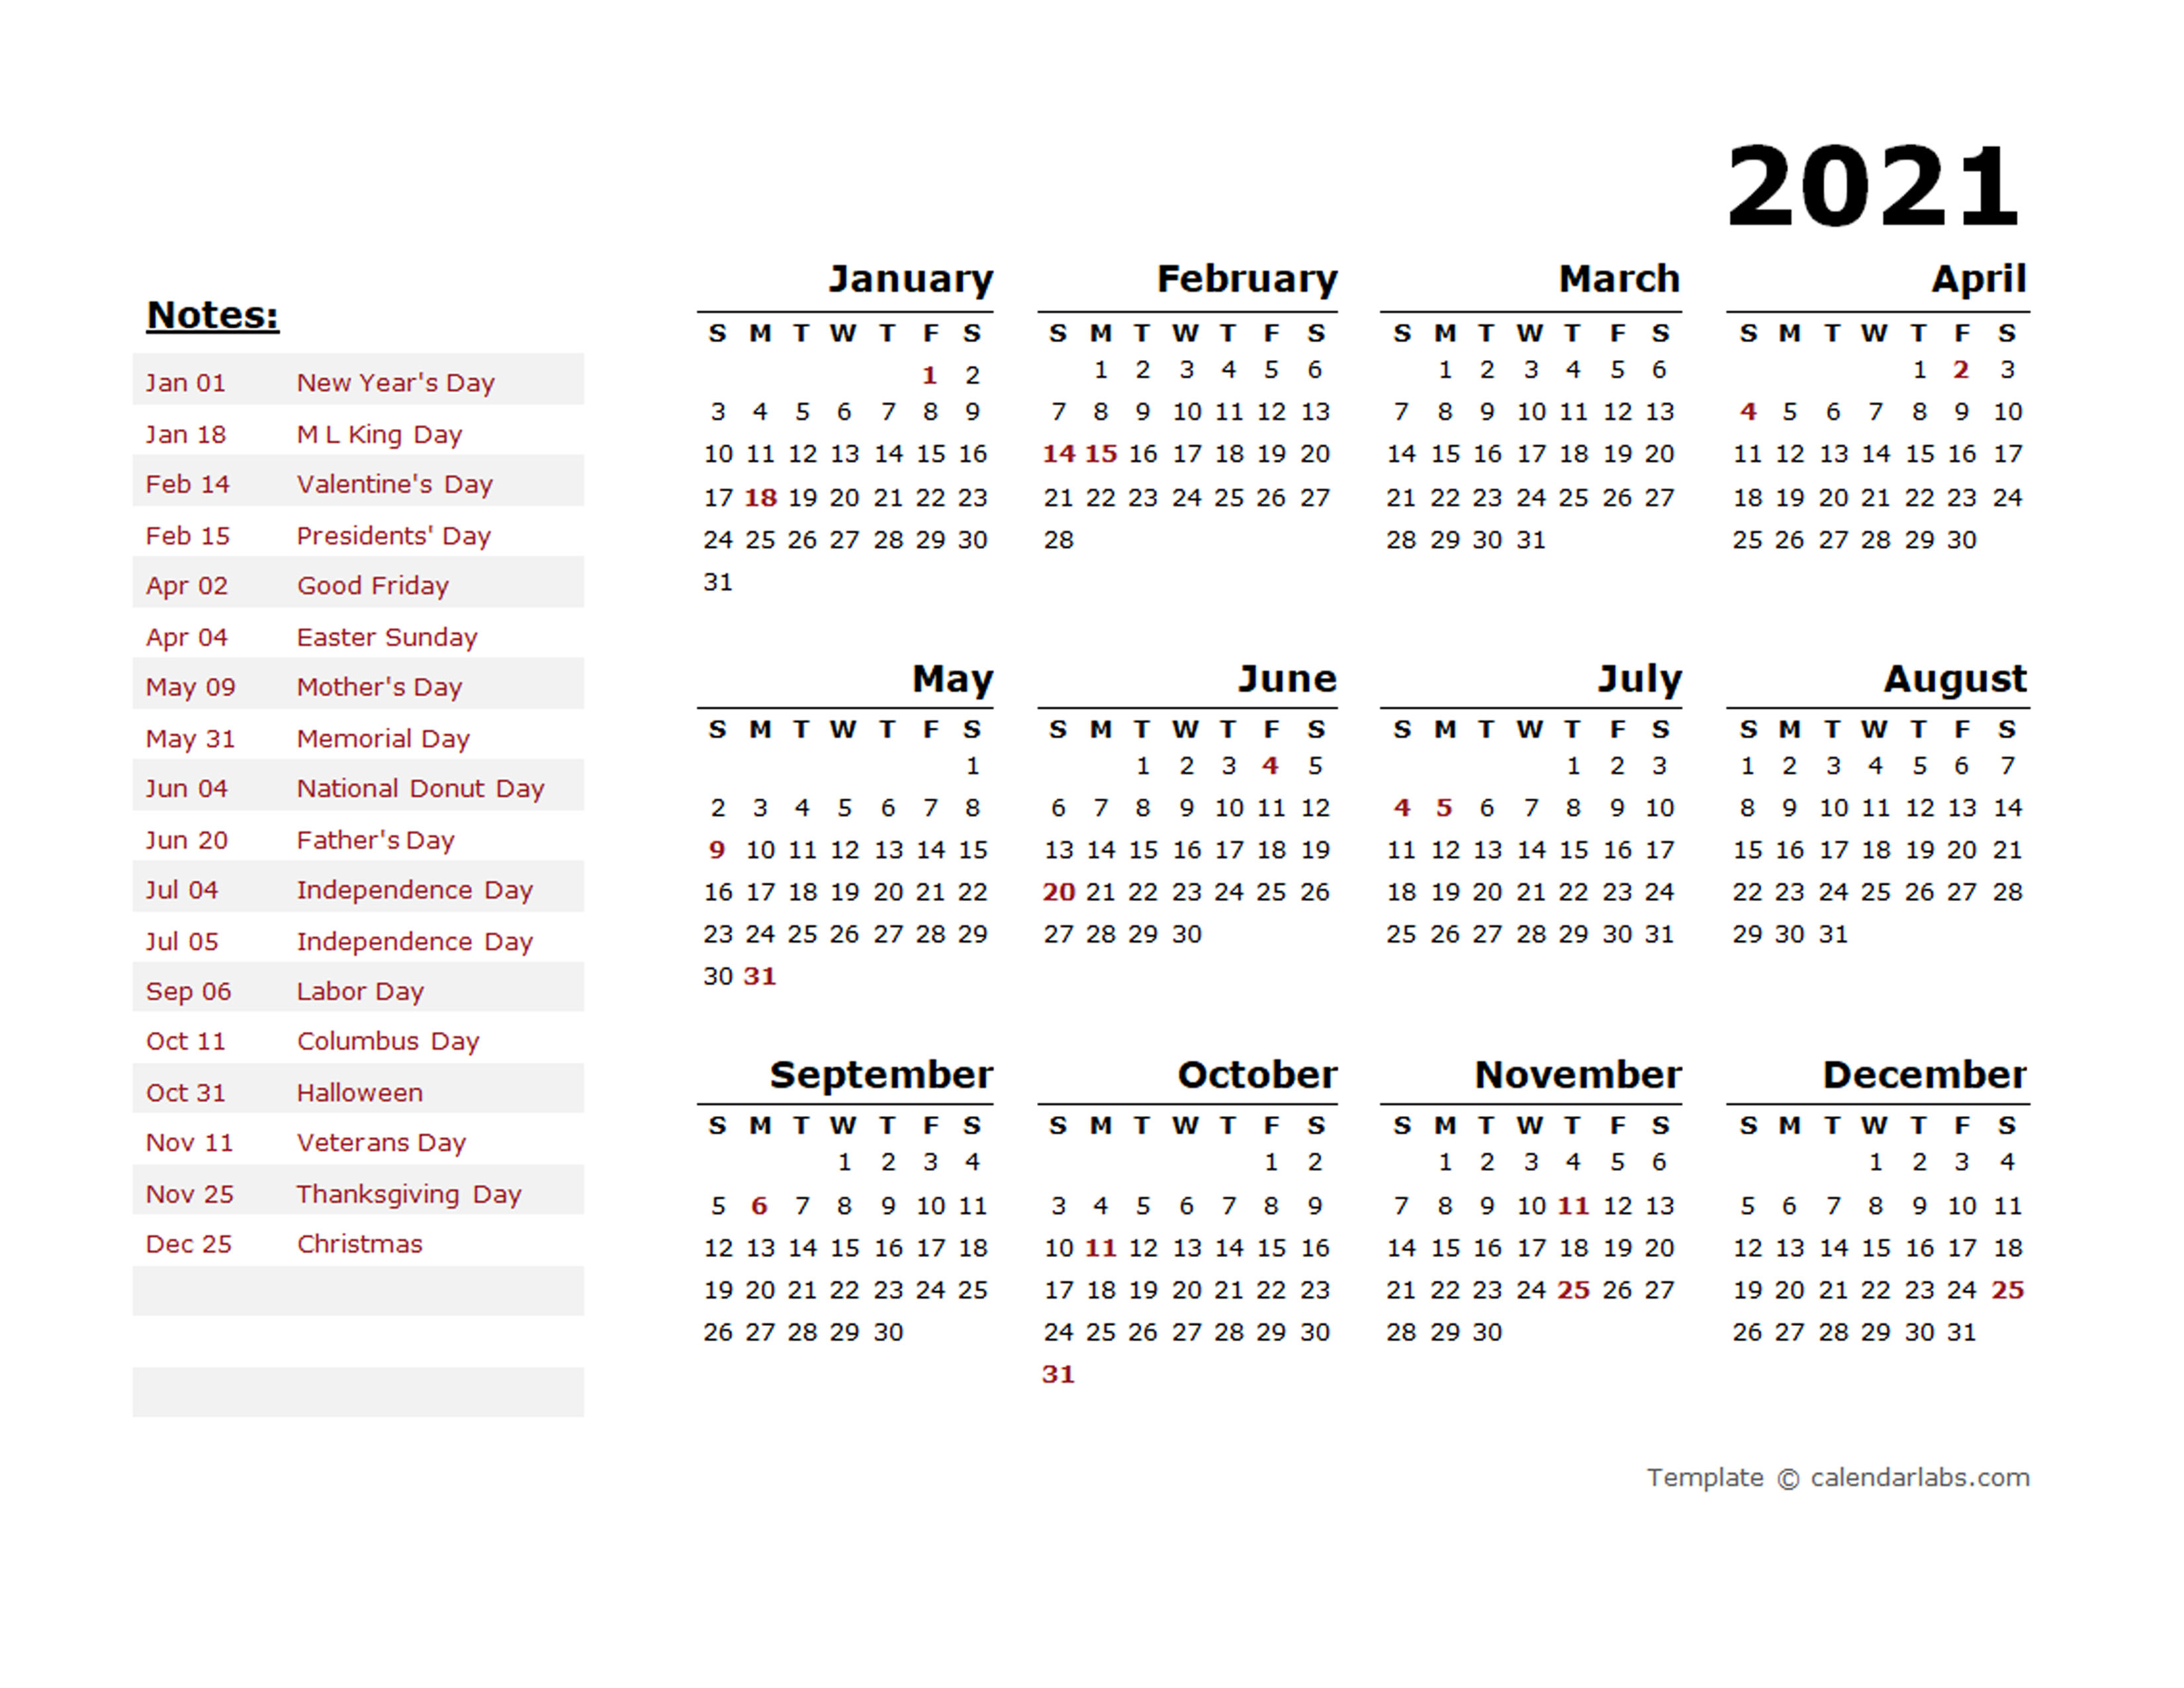 2021 Year Calendar Word Template with Holidays - Free ...